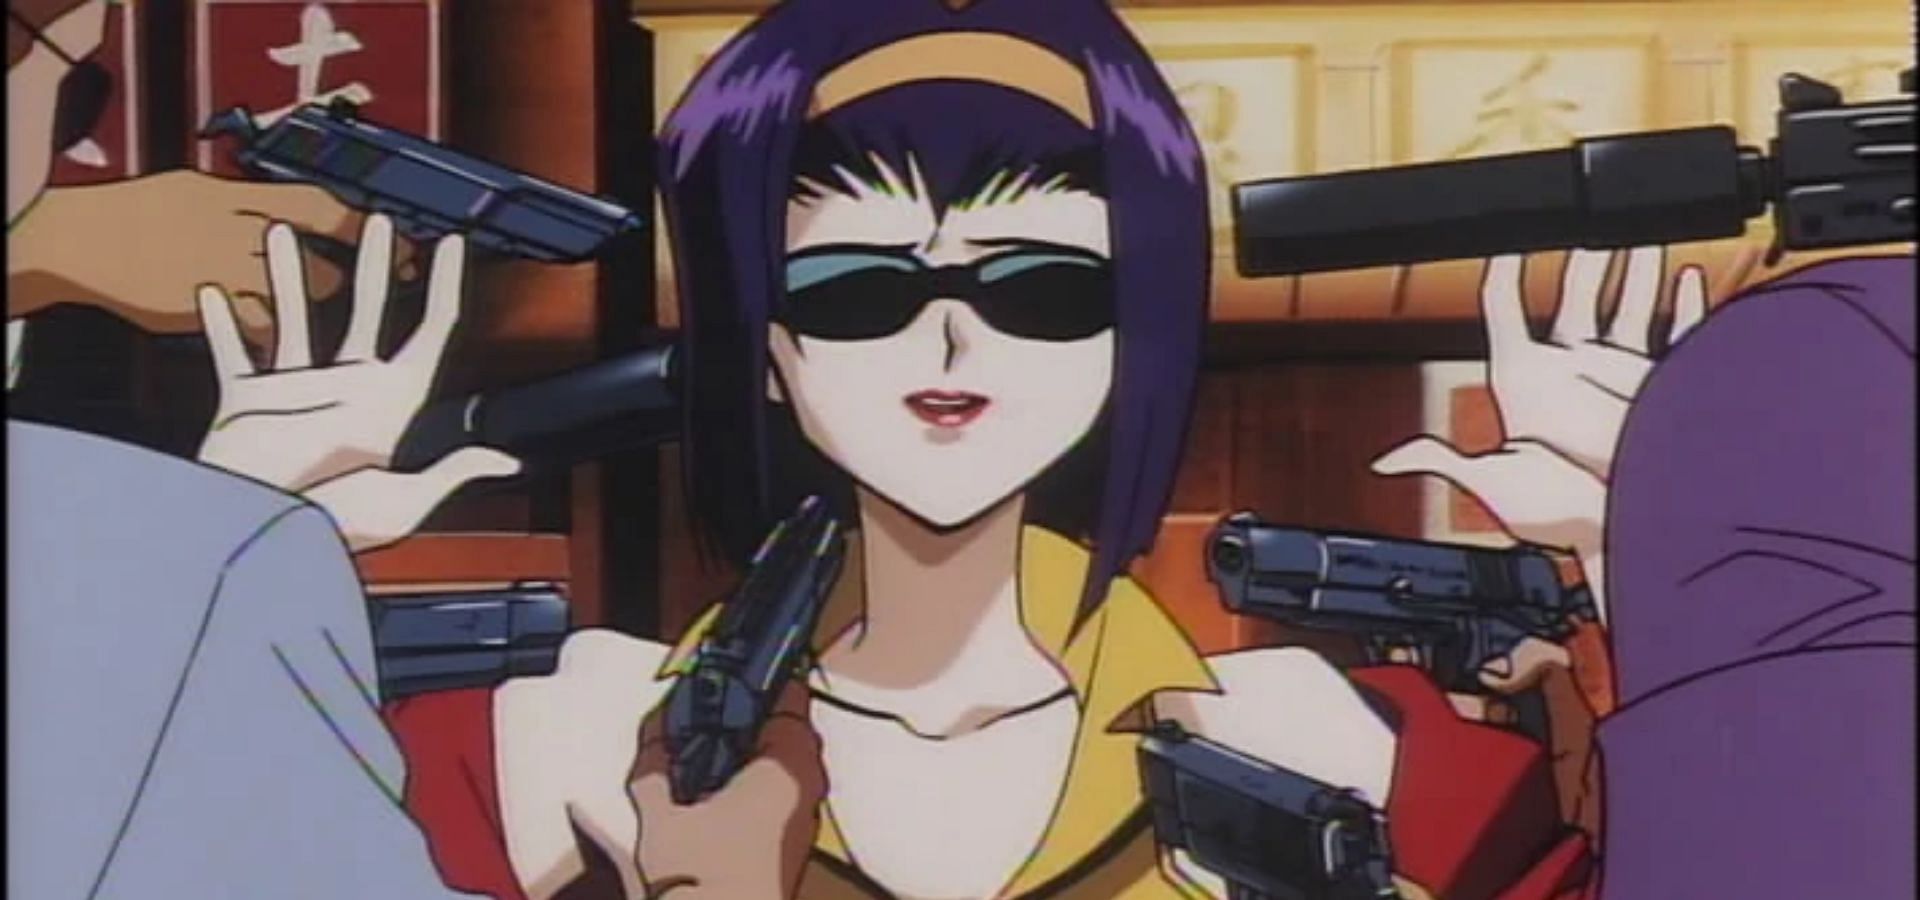 Faye Valentine is a famous anime character obsessed with money ( Image via Tomorrow Studios)